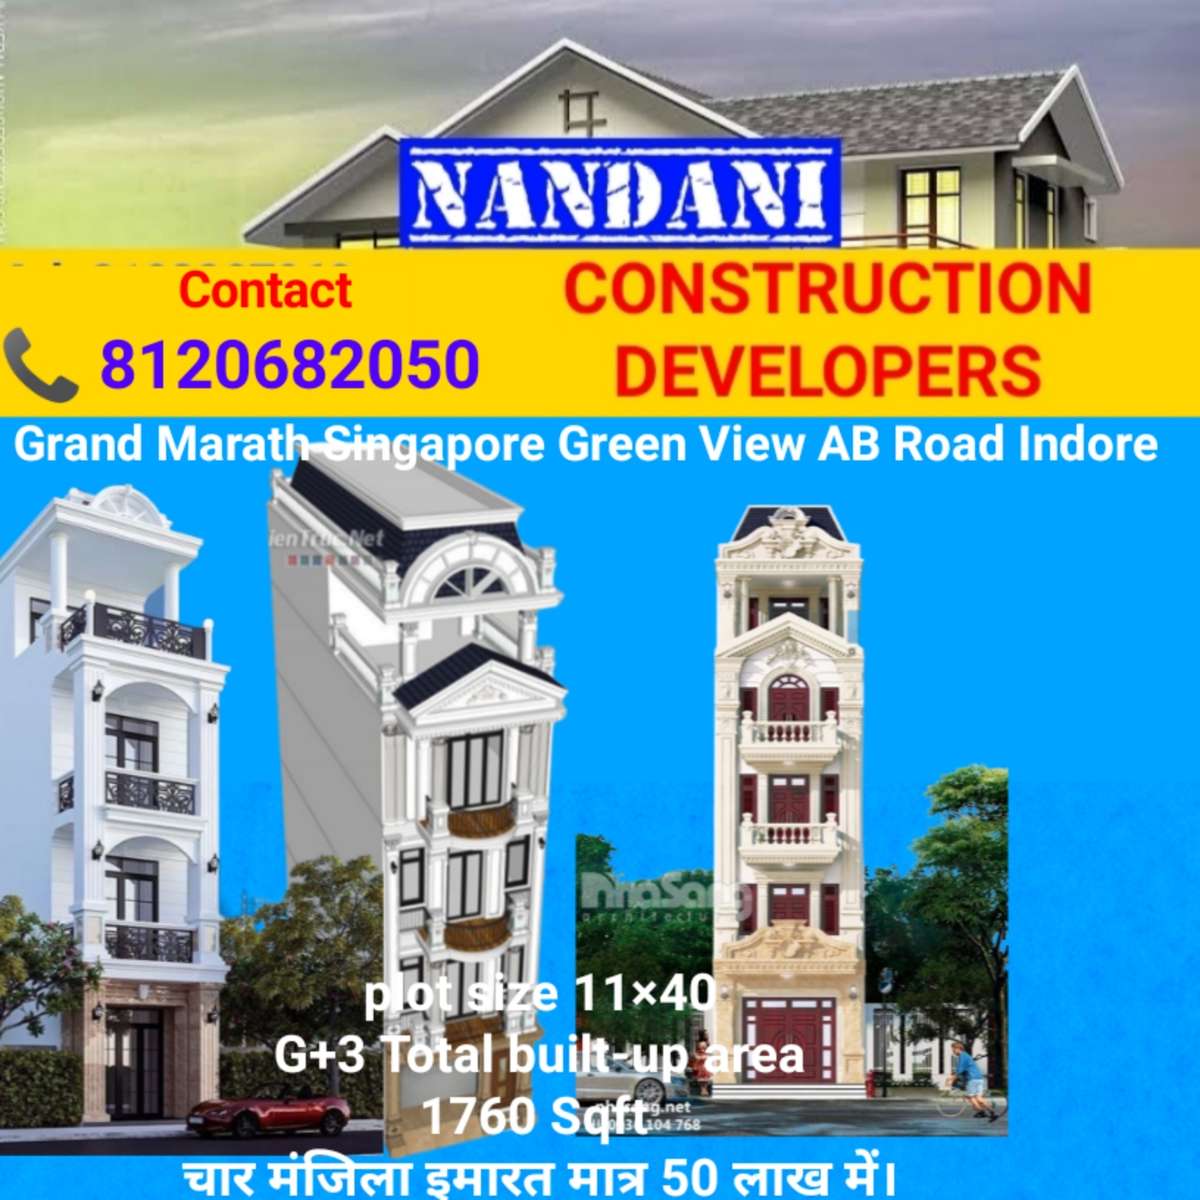 Designs by Civil Engineer Nandani Construction   Developers, Indore | Kolo